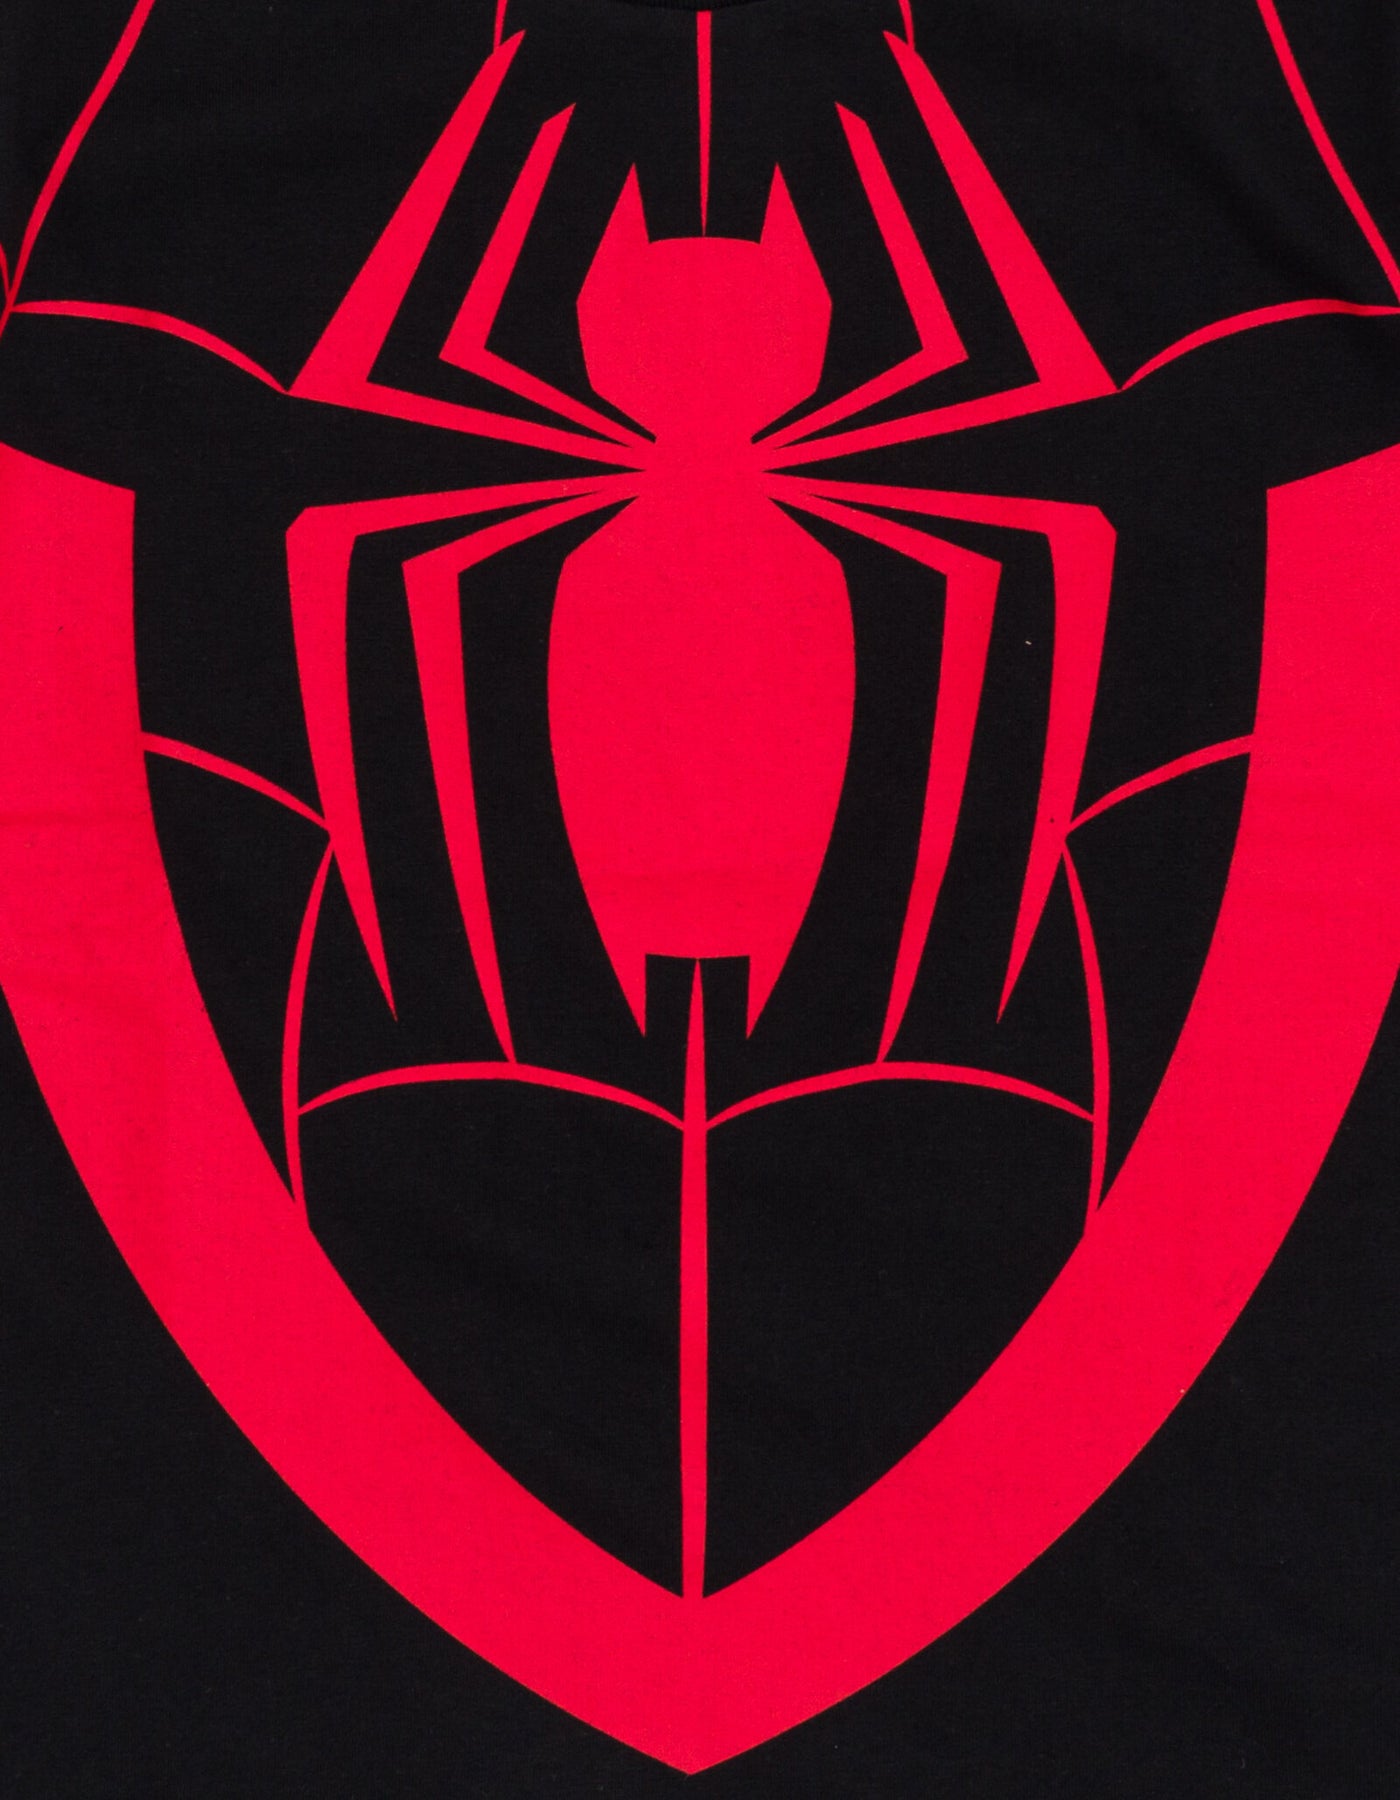 Marvel Spider-Man Miles Morales Matching Family Cosplay T-Shirt